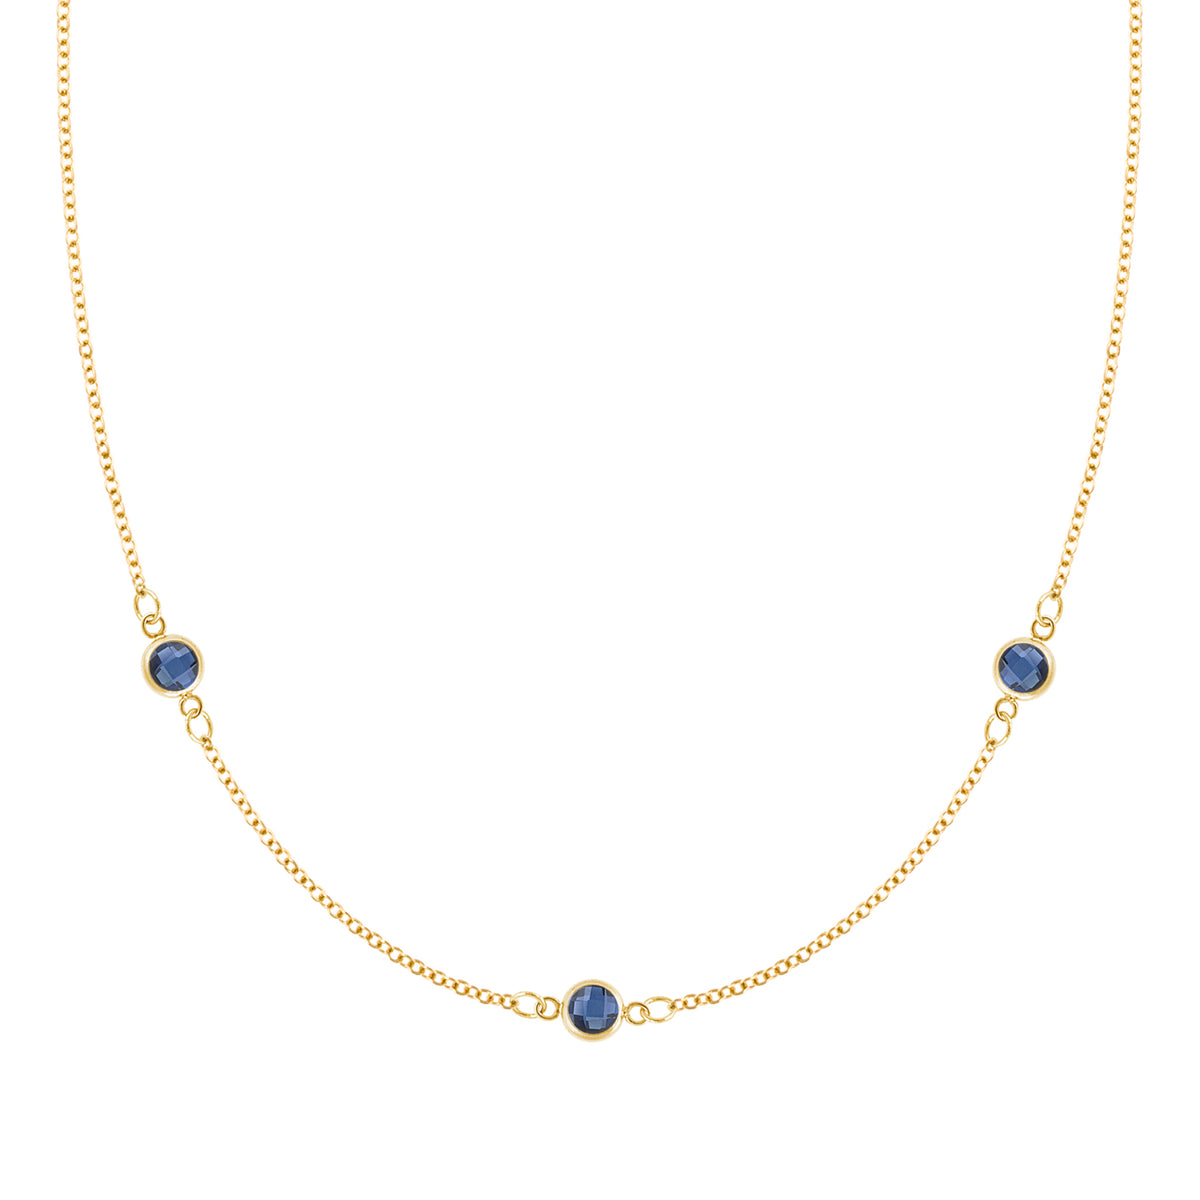 Lab-Created Sapphire Necklace with Diamonds 10K Yellow Gold | Kay Outlet